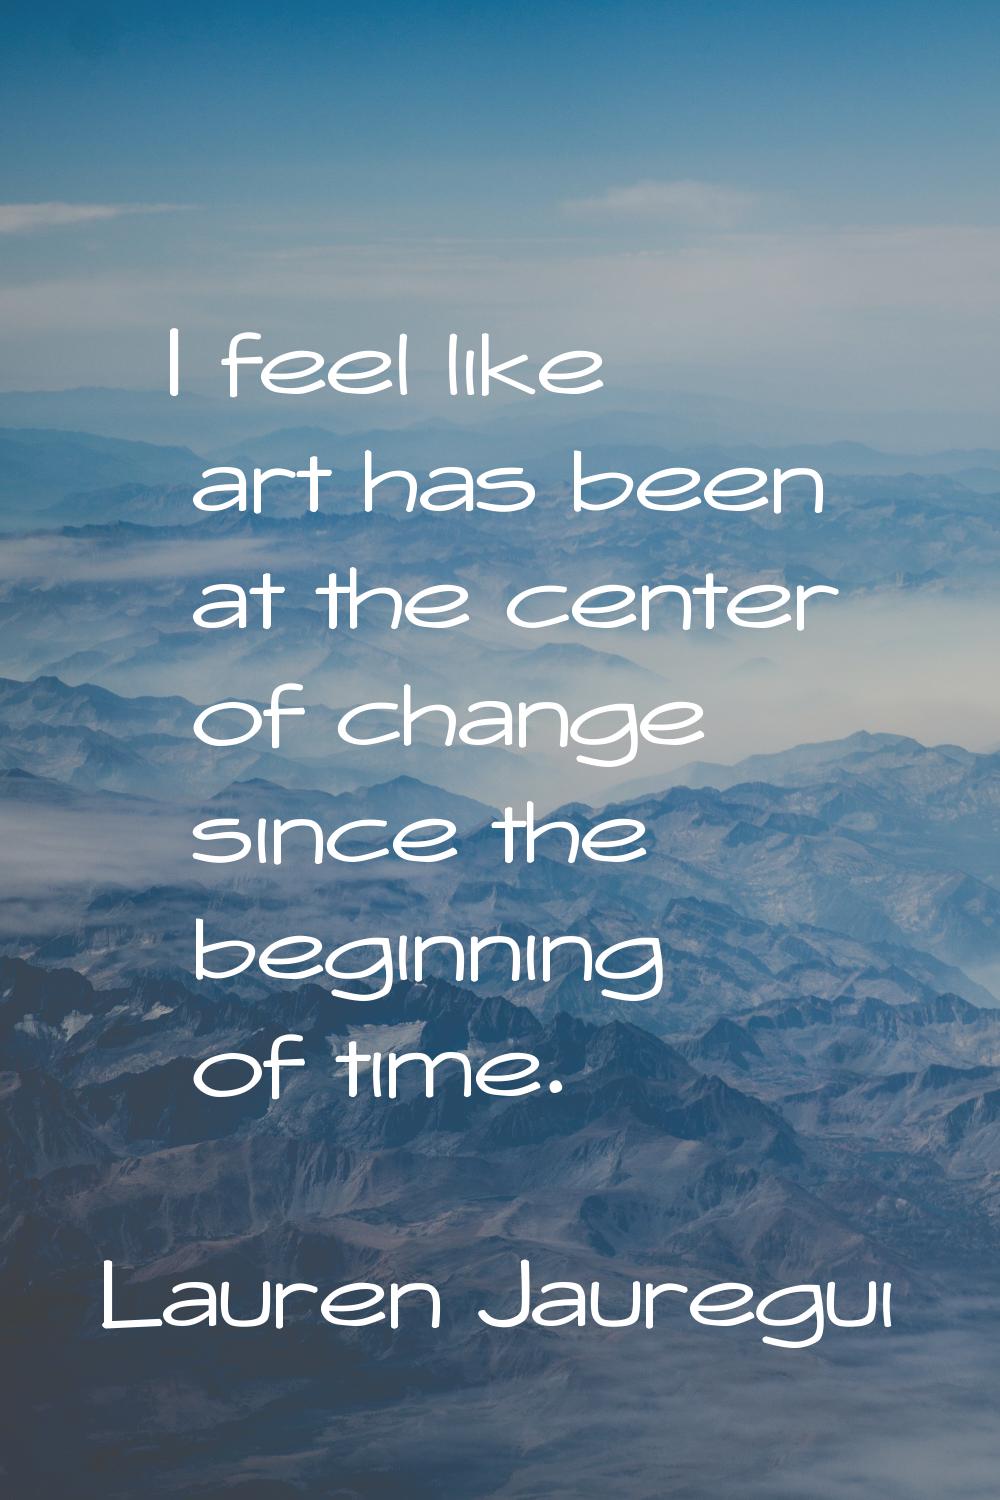 I feel like art has been at the center of change since the beginning of time.